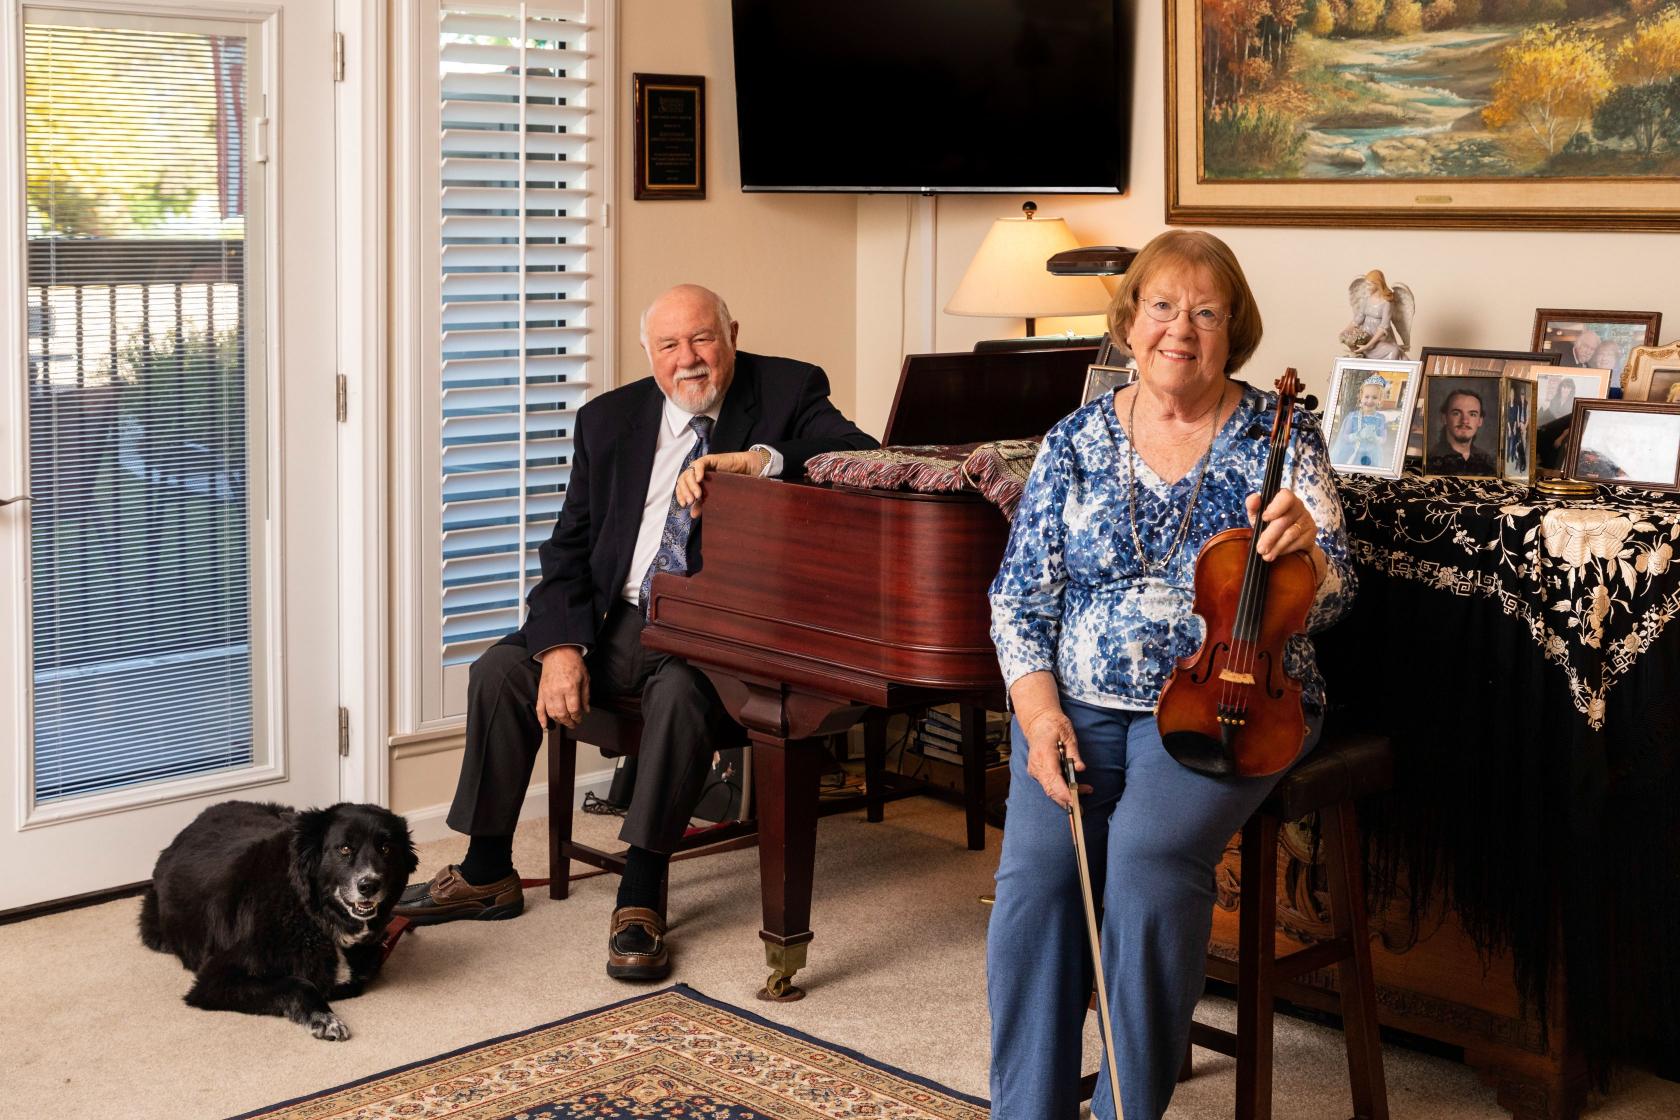 Man sitting close to a piano and lady holding a violin